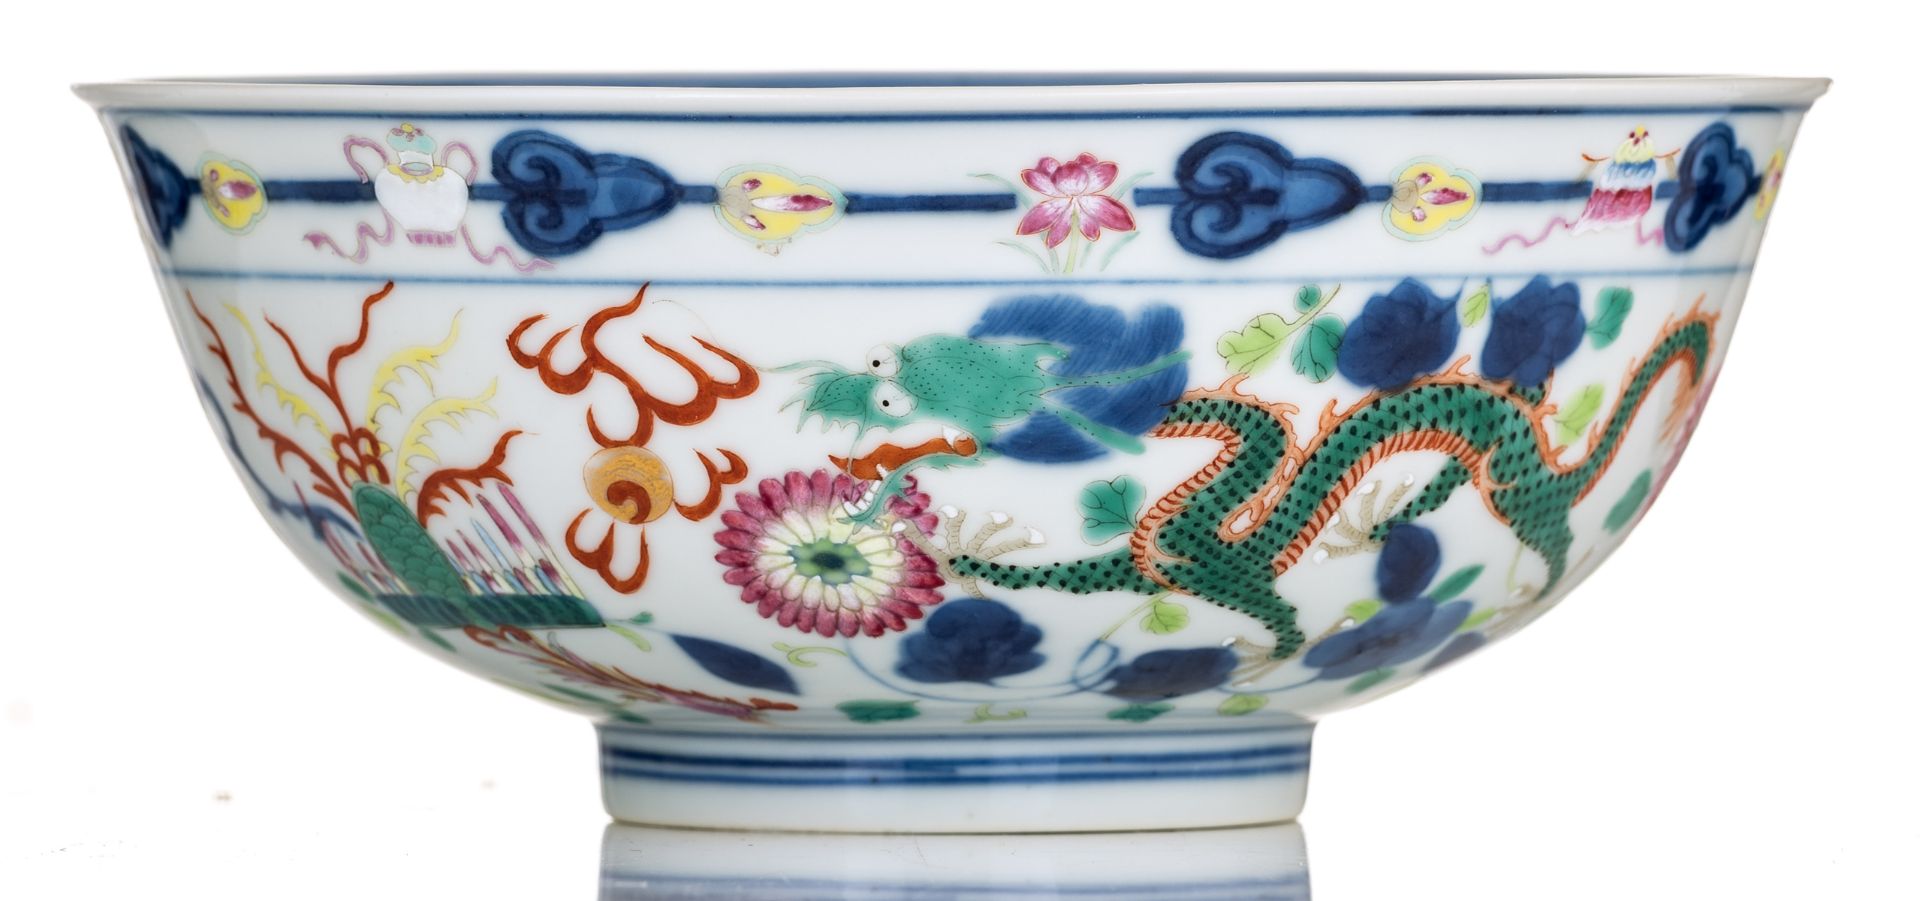 A Chinese polychrome bowl, decorated with flowers and dragons, chasing the flaming pearl, with a Ton - Bild 2 aus 7